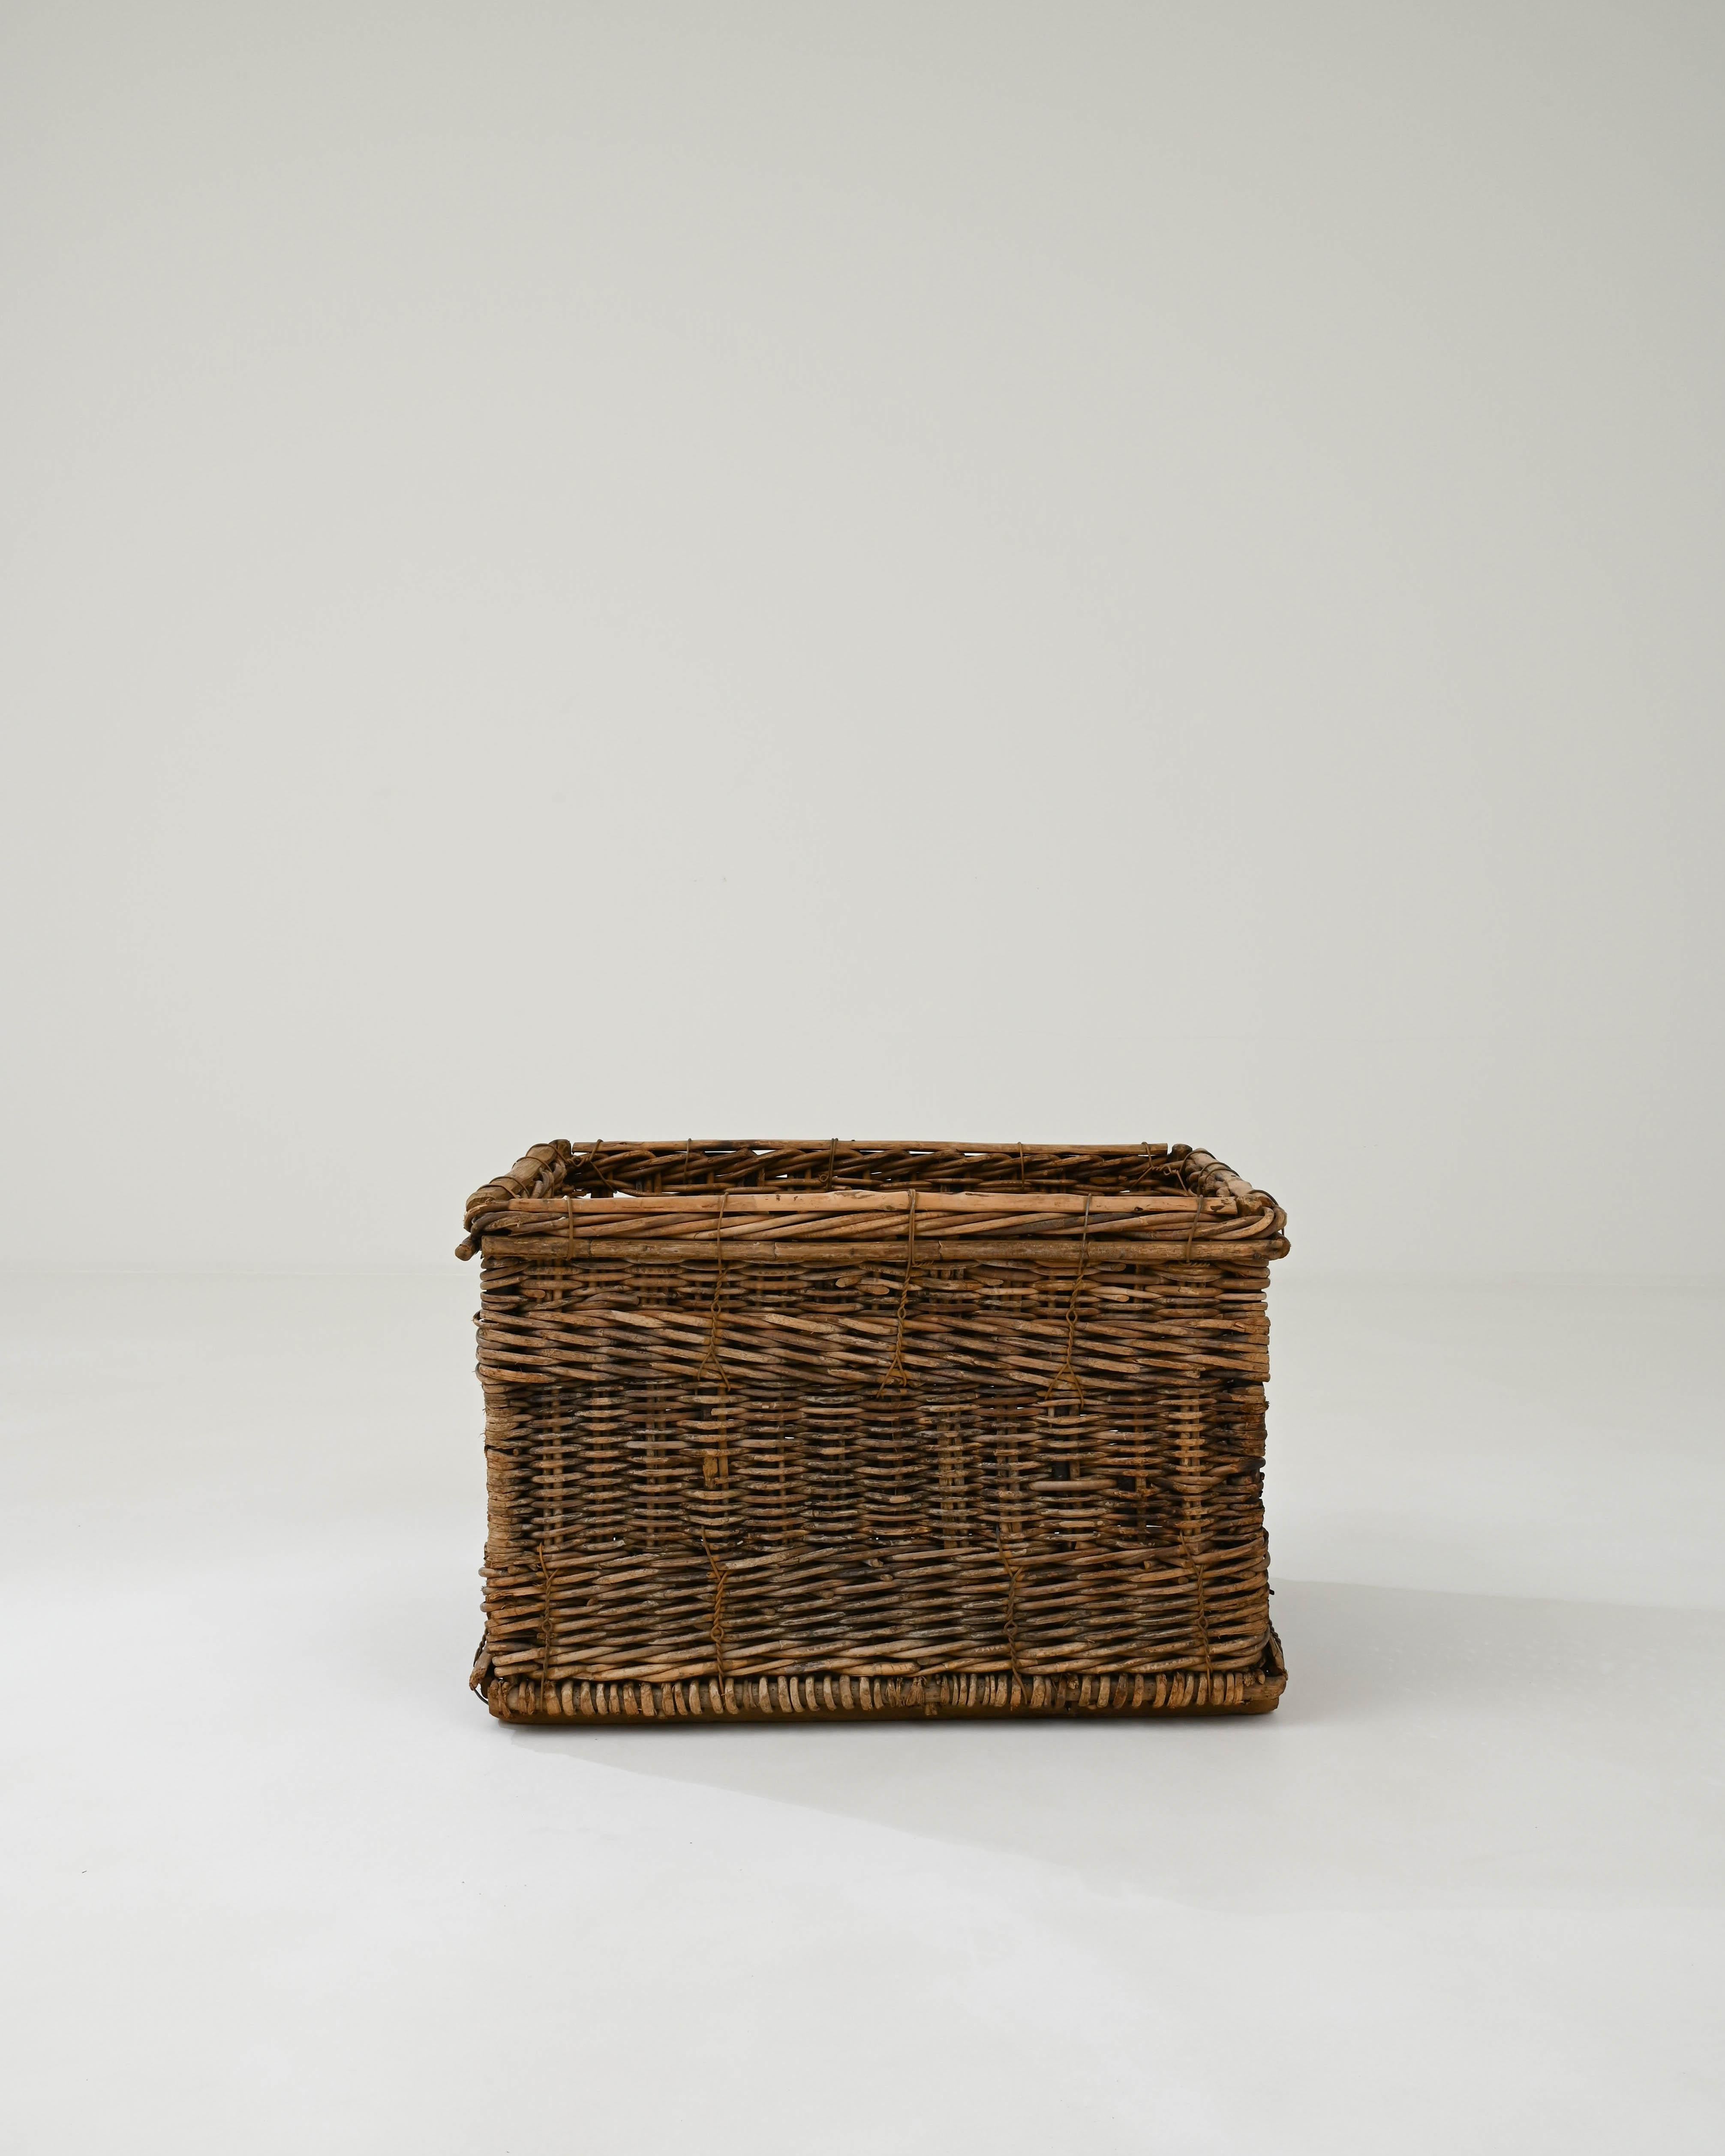 Hand-woven in France in the early 20th century, this wicker basket boasts a practical rectangular shape and the craftsmanship of the weaving technique, imparting a sense of rustic coziness. This unique basket is interwoven with a metal wire